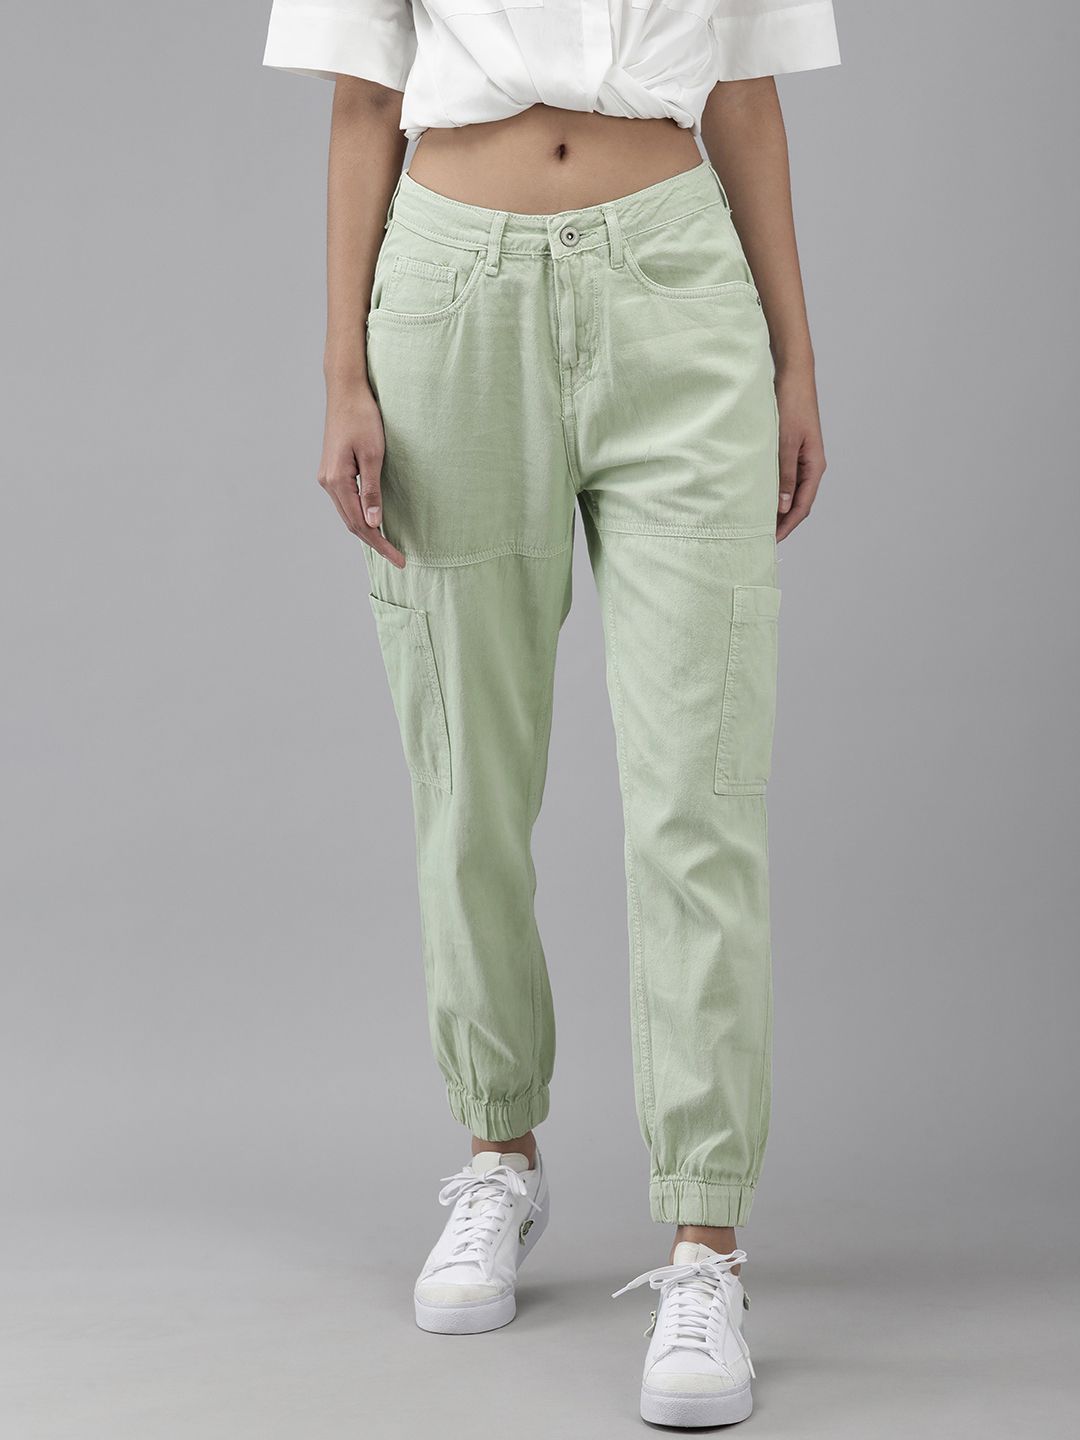 The Roadster Lifestyle Co Women Green Jogger Jeans Price in India